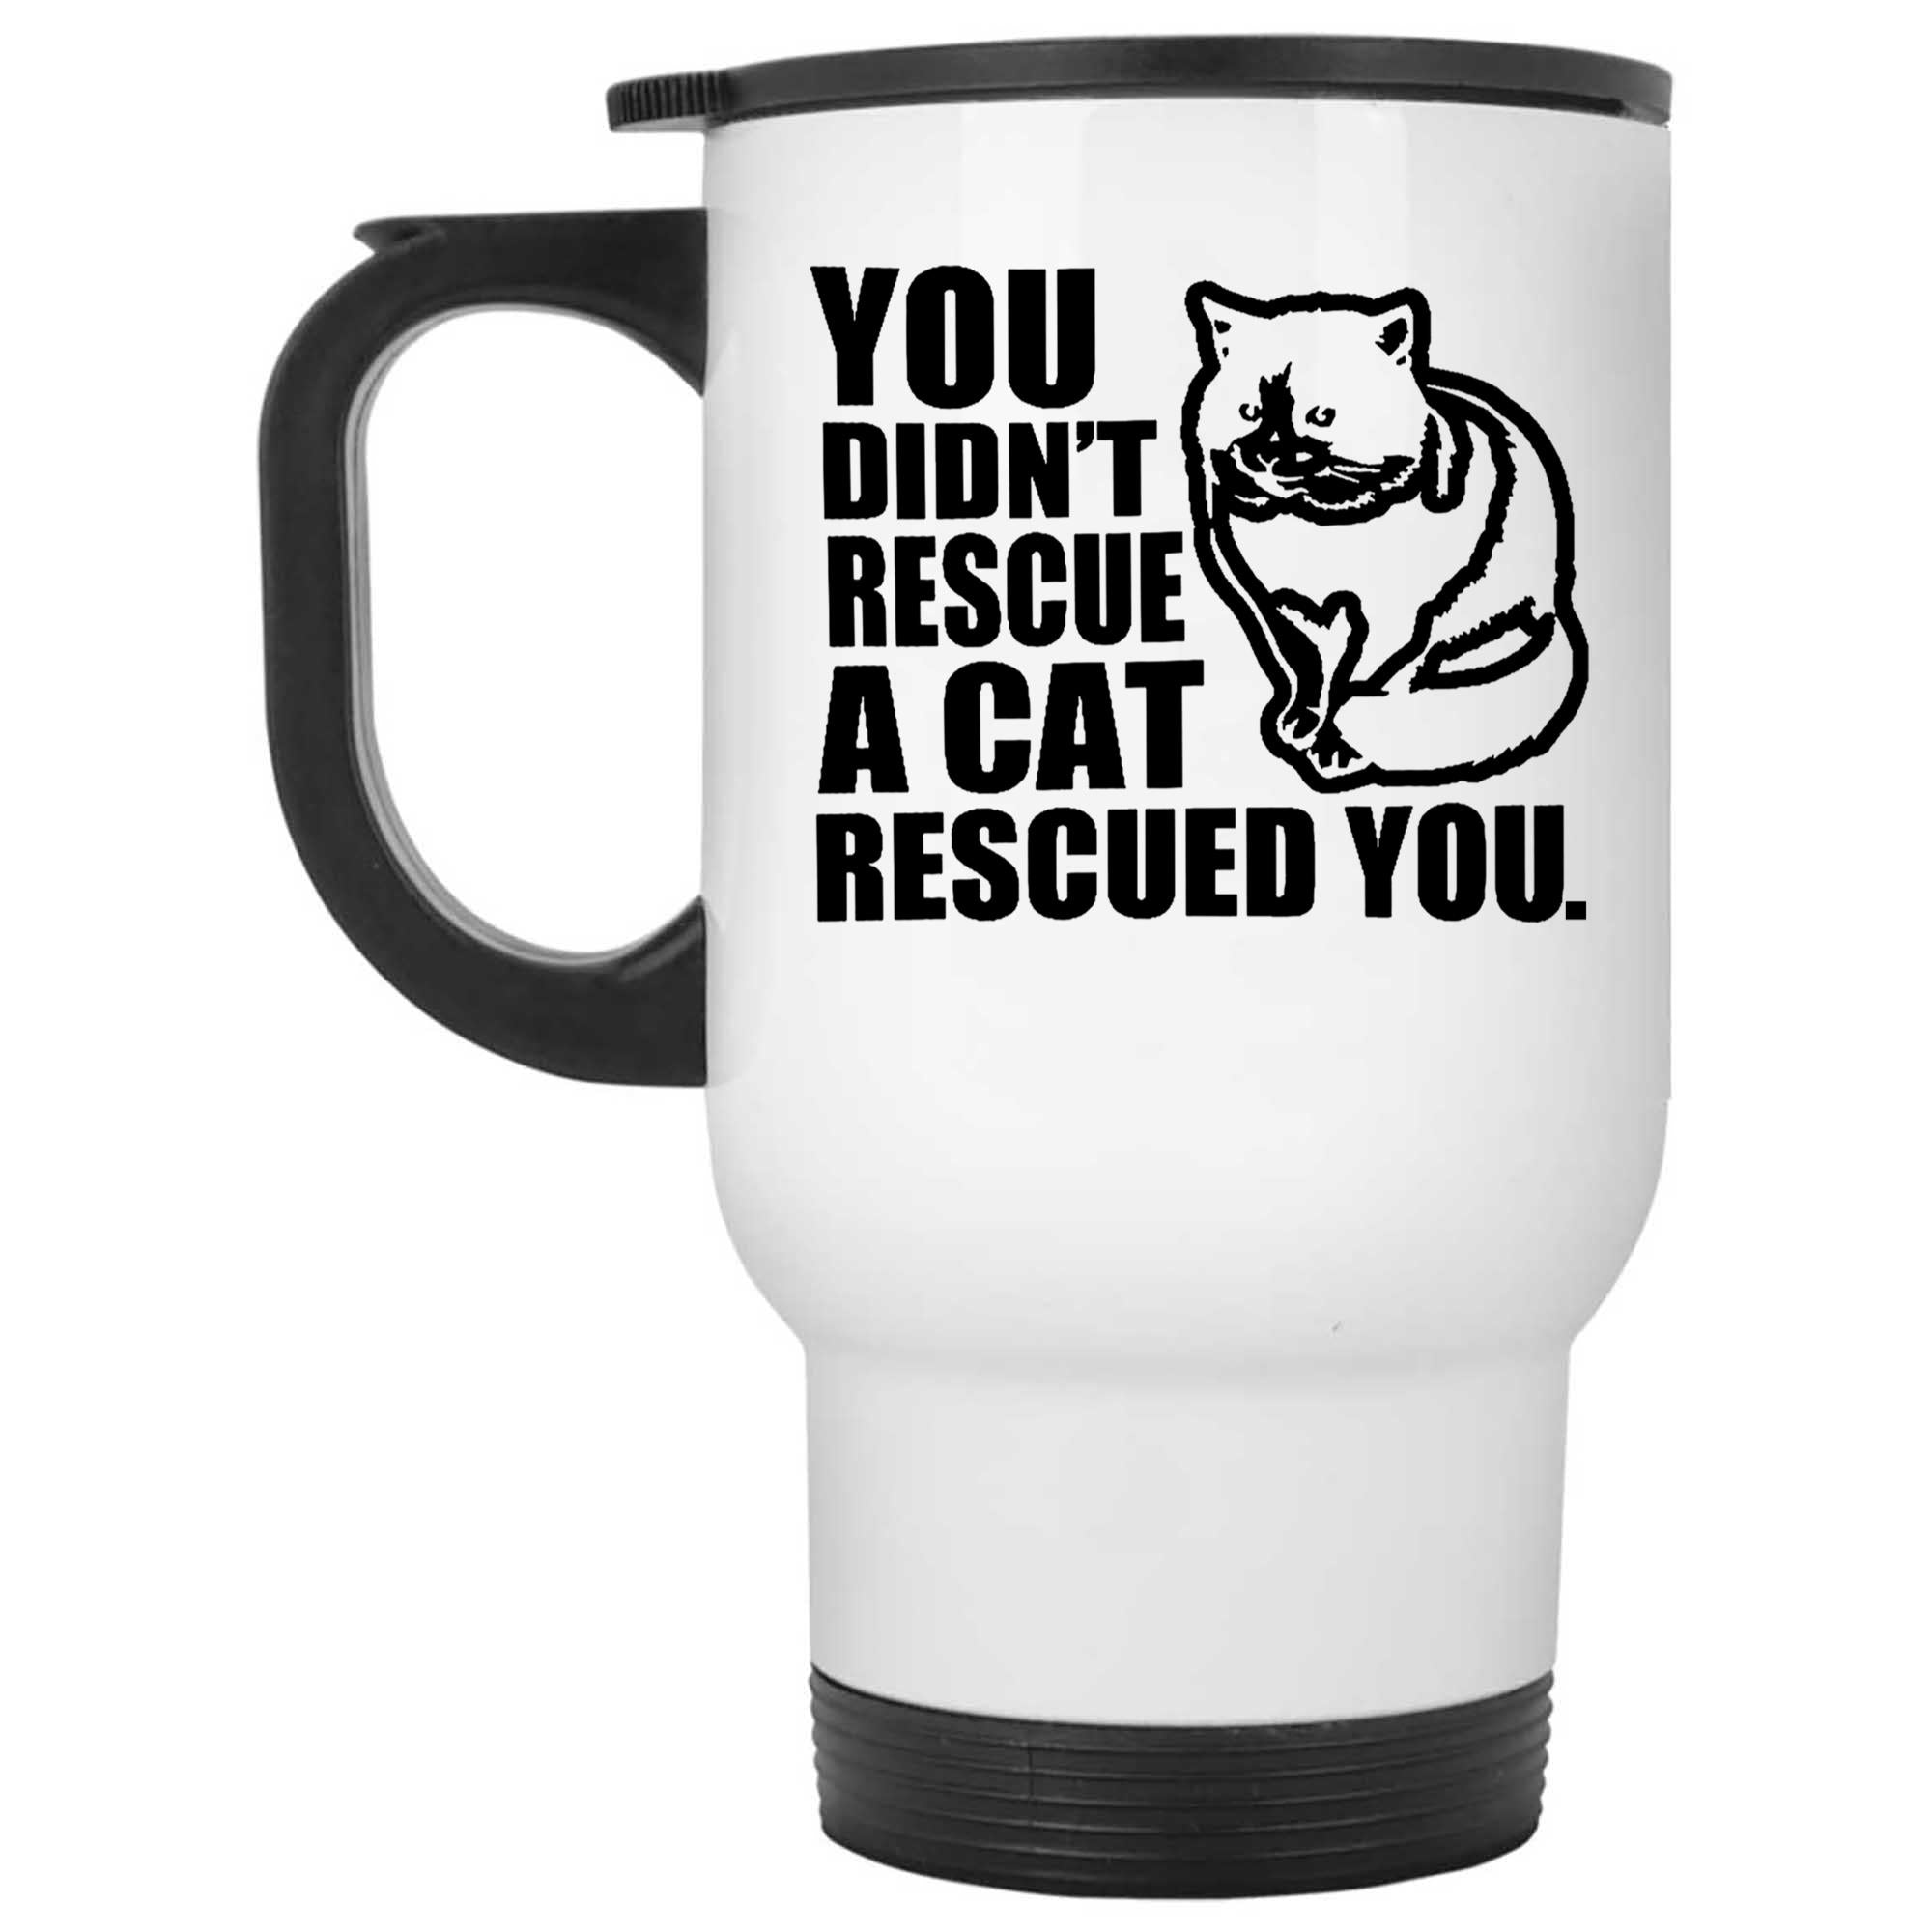 Skitongifts Funny Ceramic Novelty Coffee Mug Cat Lovers You Didnt Rescue A Cat Rescued You qQpSvDM